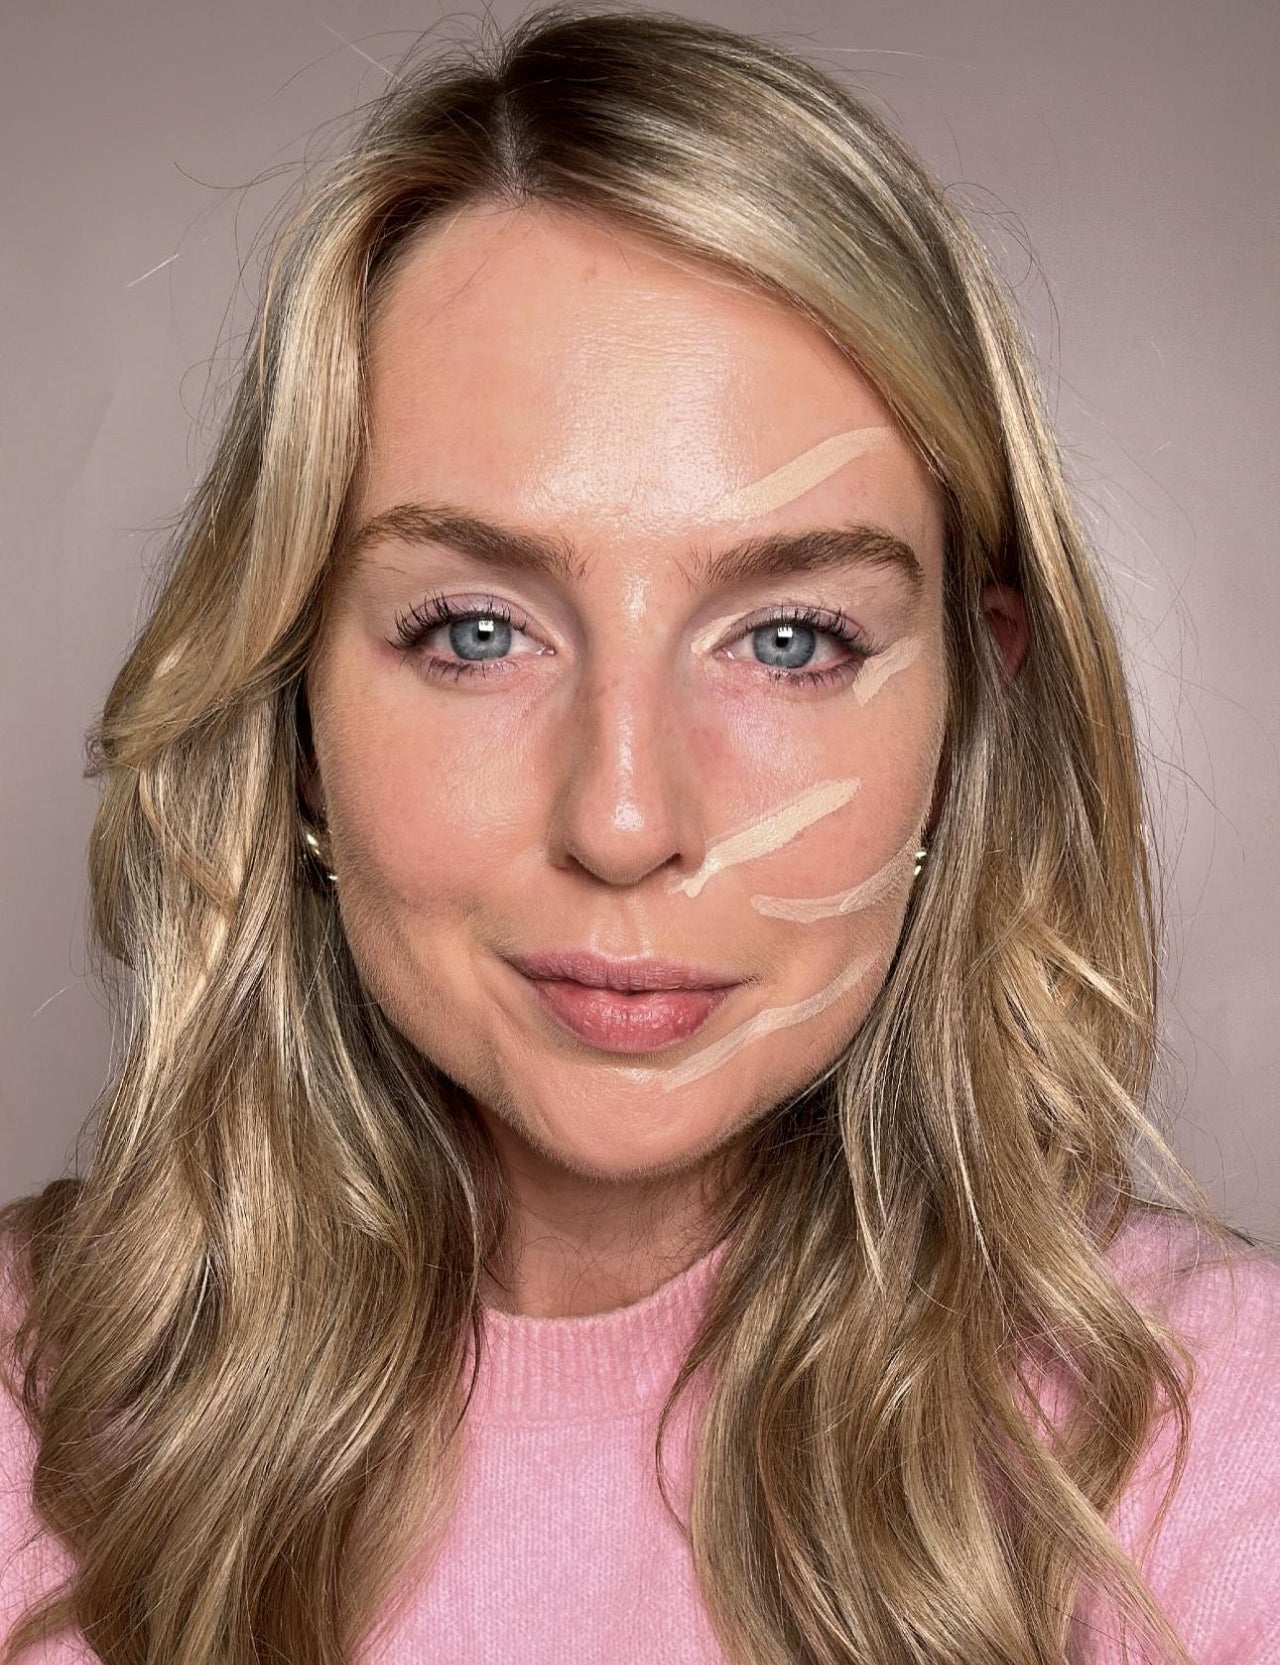 How to Use Concealer for a Facelift Effect